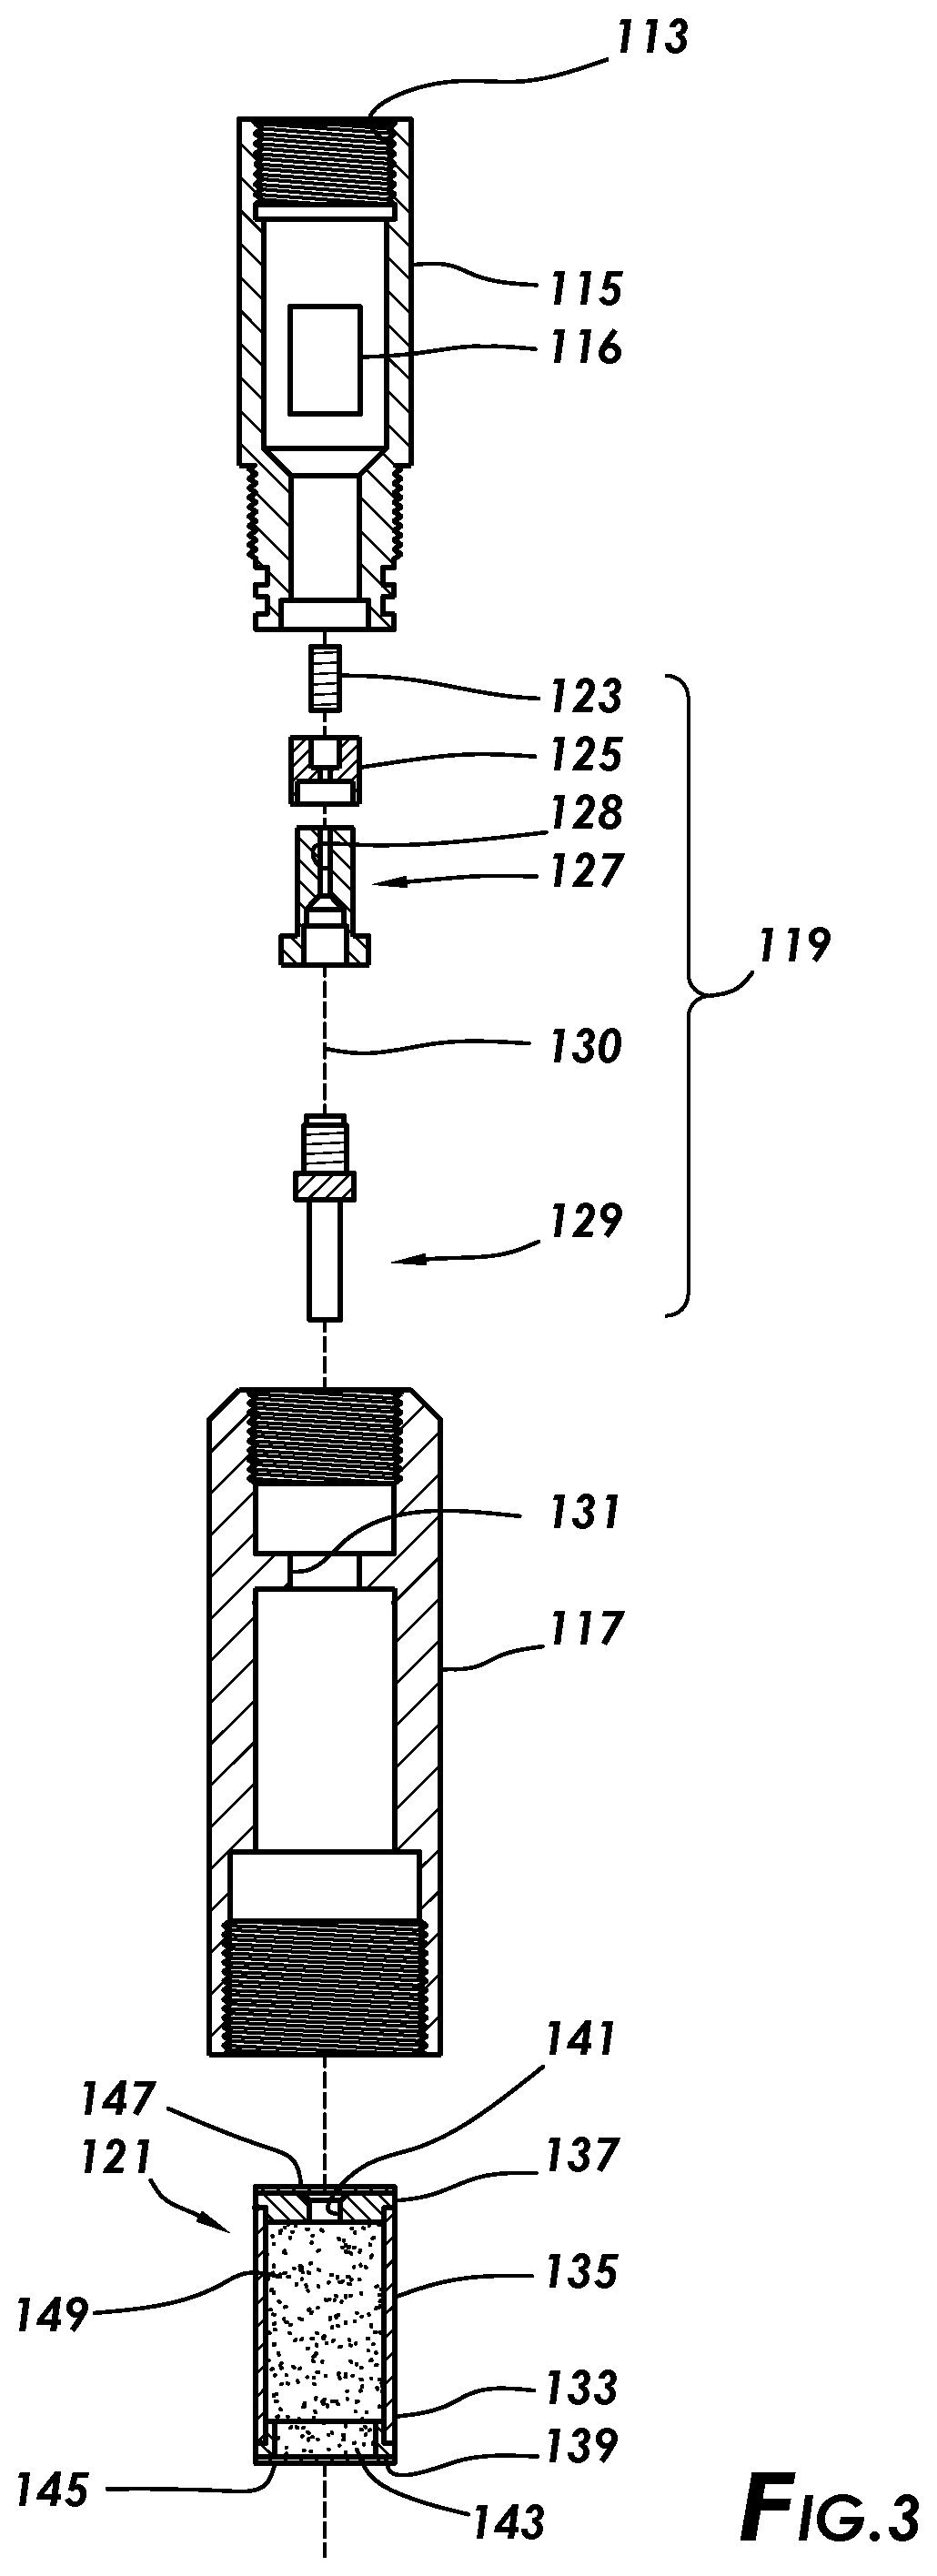 Non-mechanical ported perforating torch